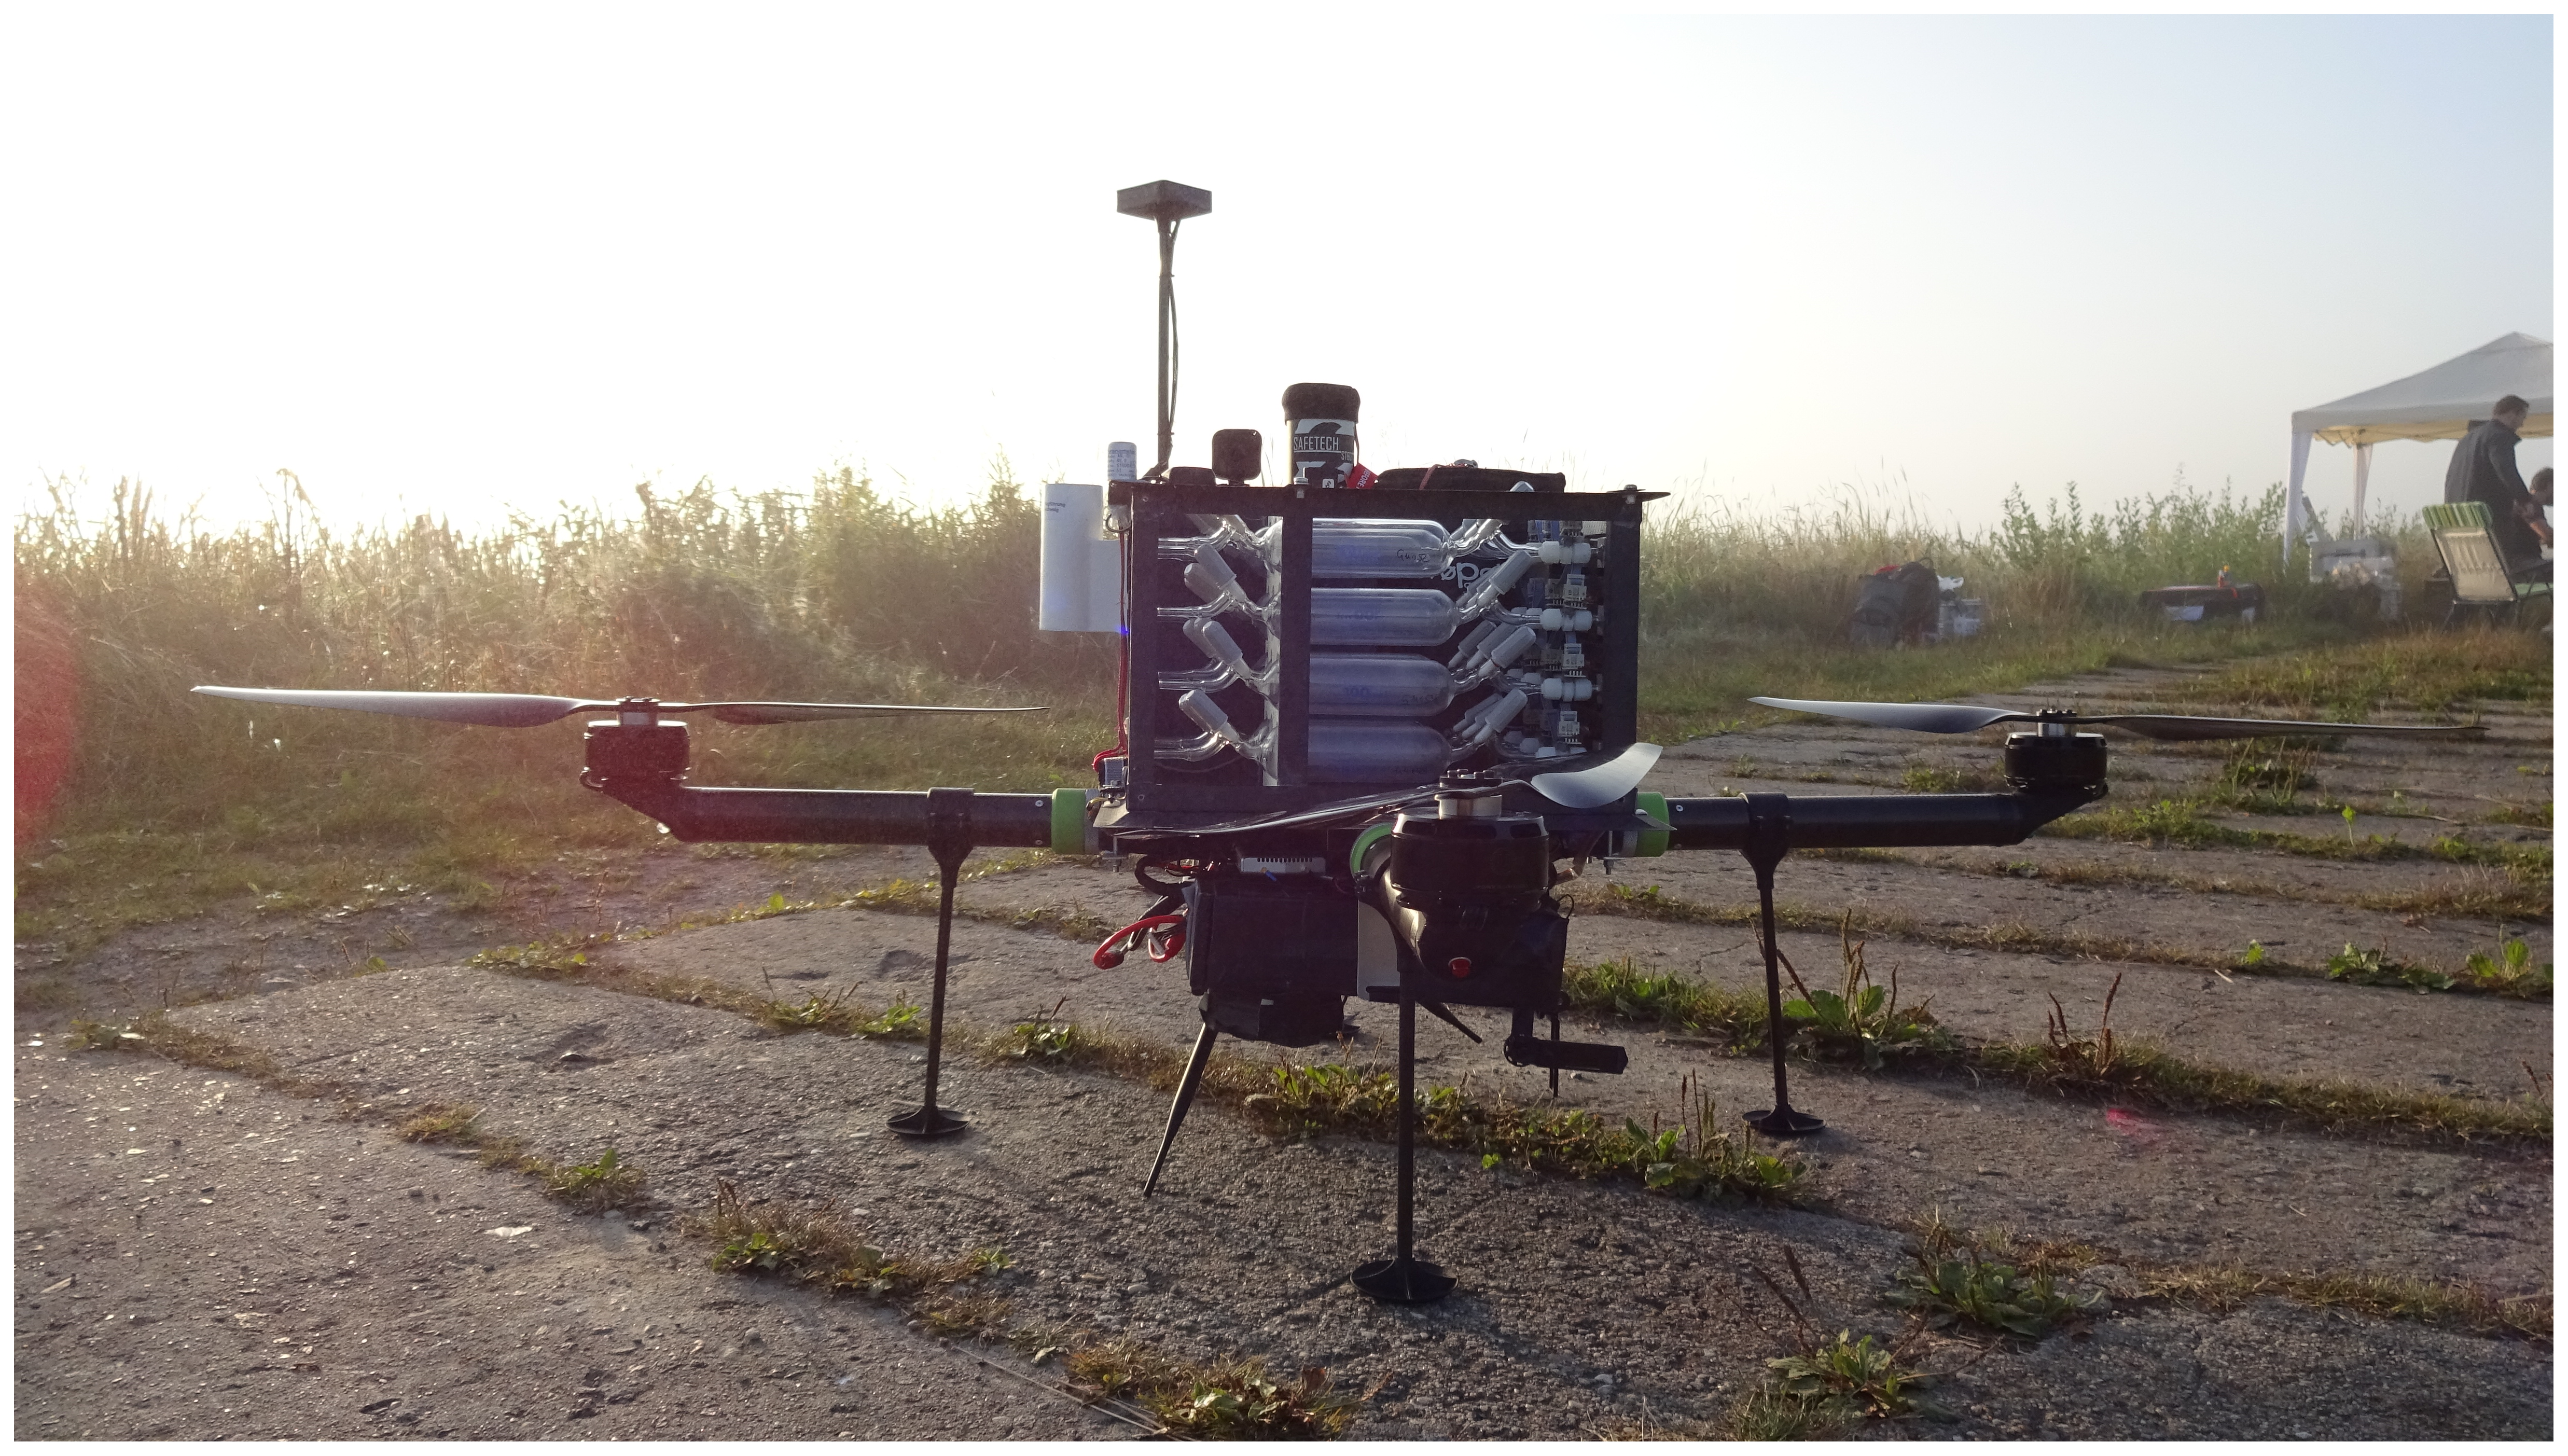 Amt Studying Boundary Layer Methane Isotopy And Vertical Mixing Processes At A Rewetted Peatland Site Using An Unmanned Aircraft System